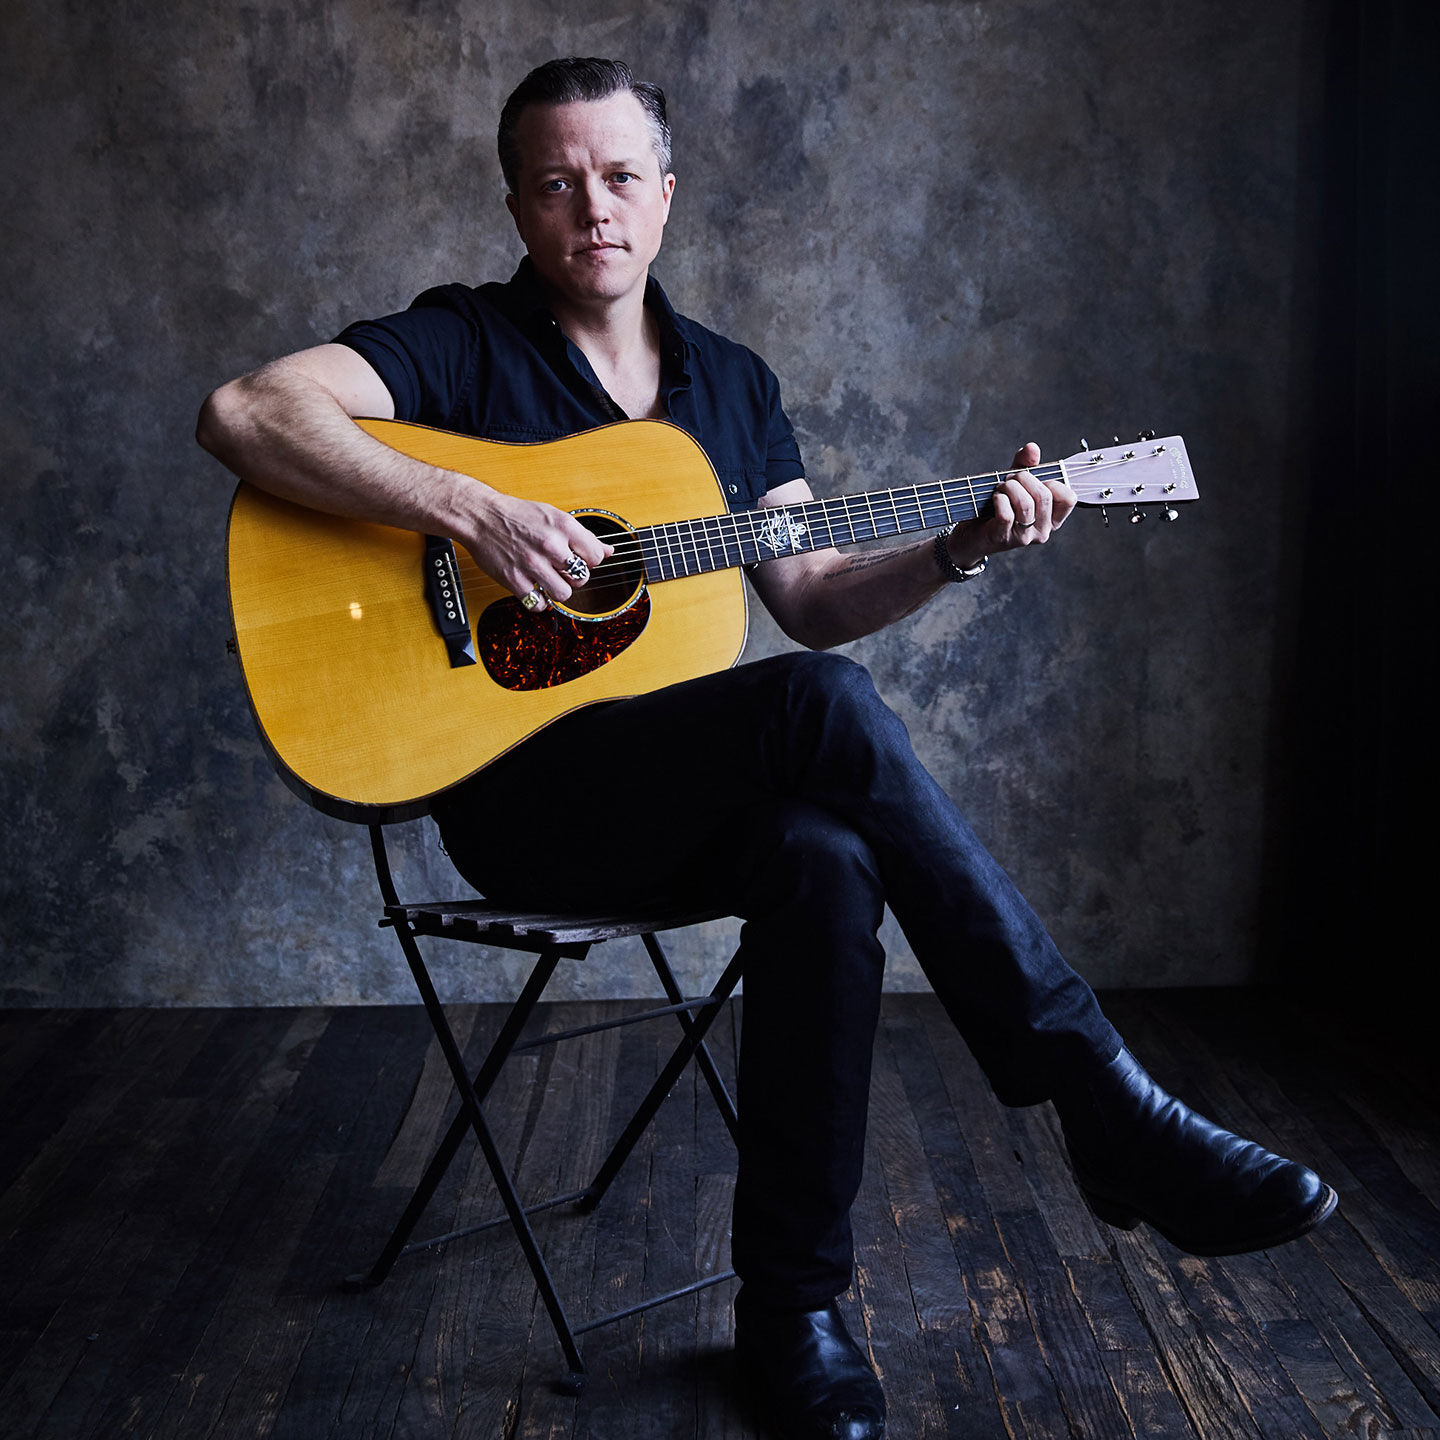 Jason Isbell wearing dark colors holding a Martin Dreadnought guitar while sitting in a folding chair